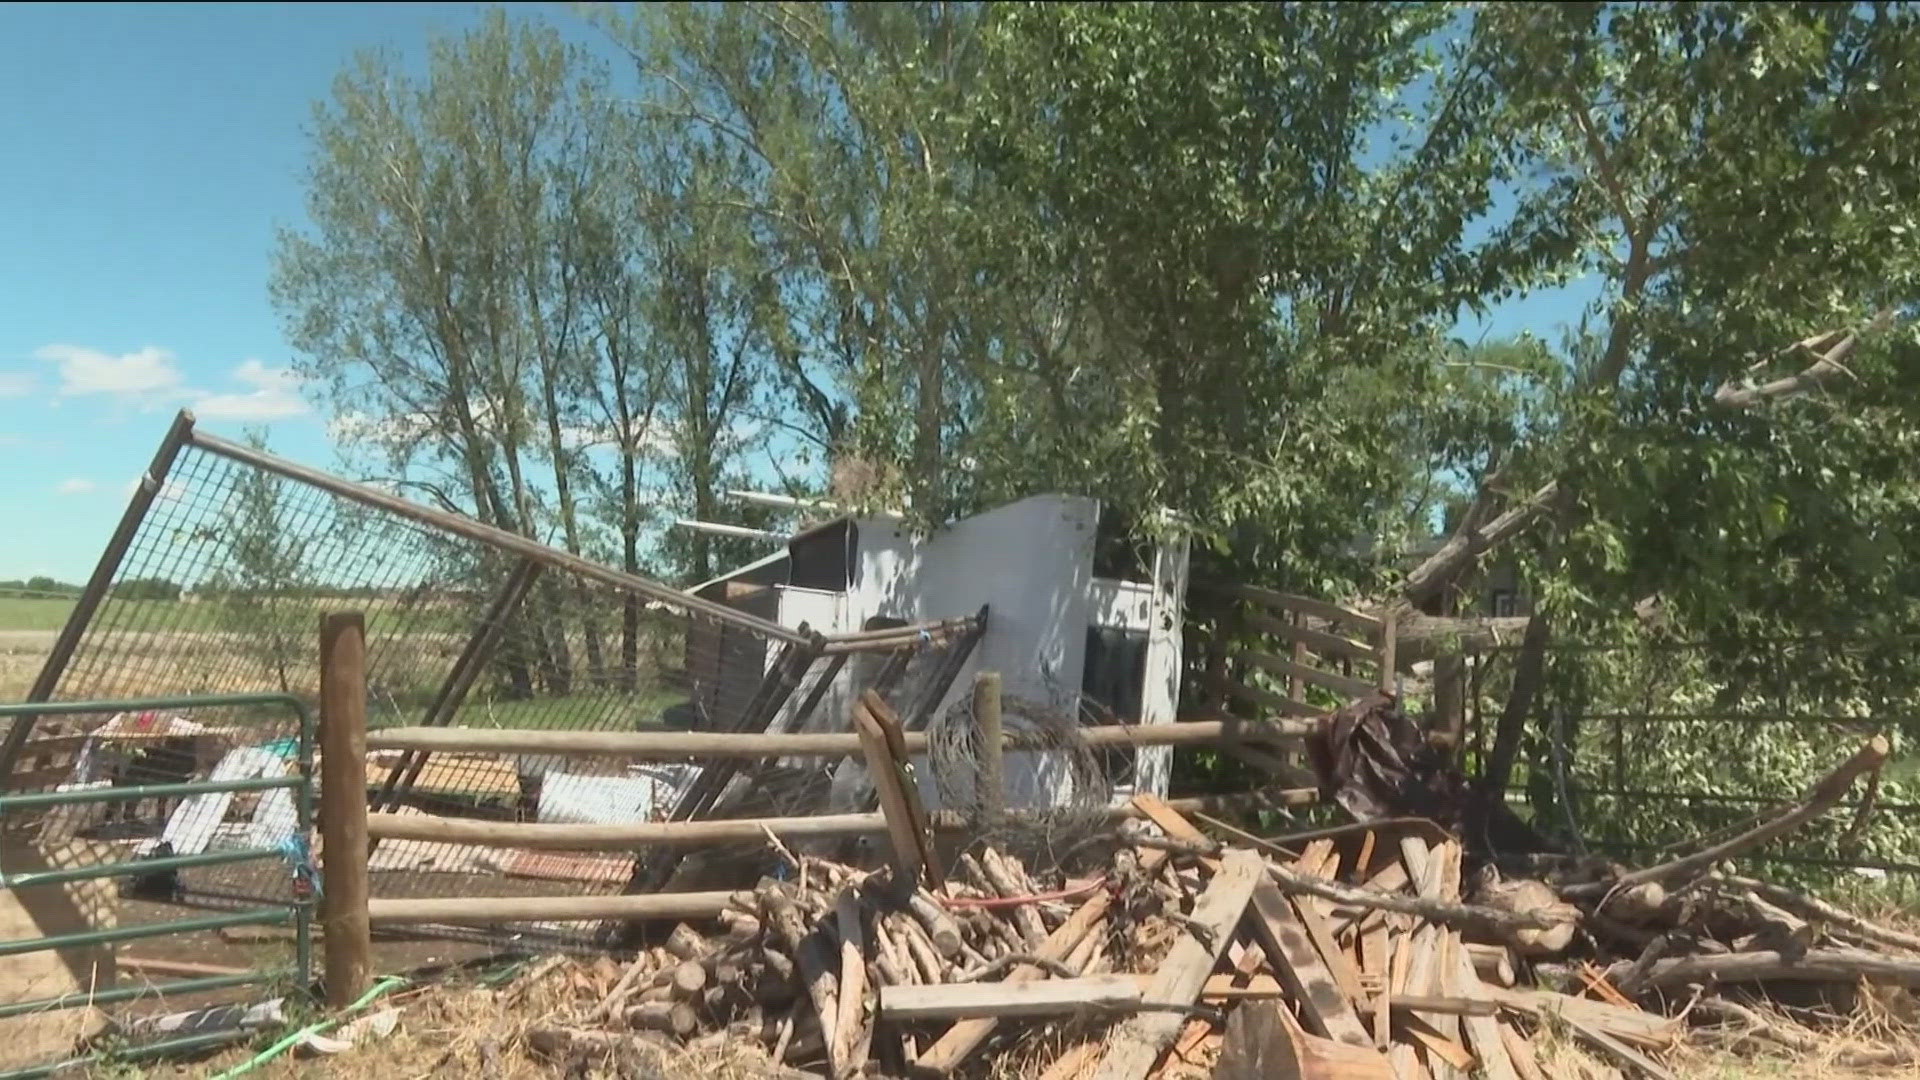 The National Weather Service said the microburst was created by a supercell thunderstorm. The most significant damage was west of Parma.